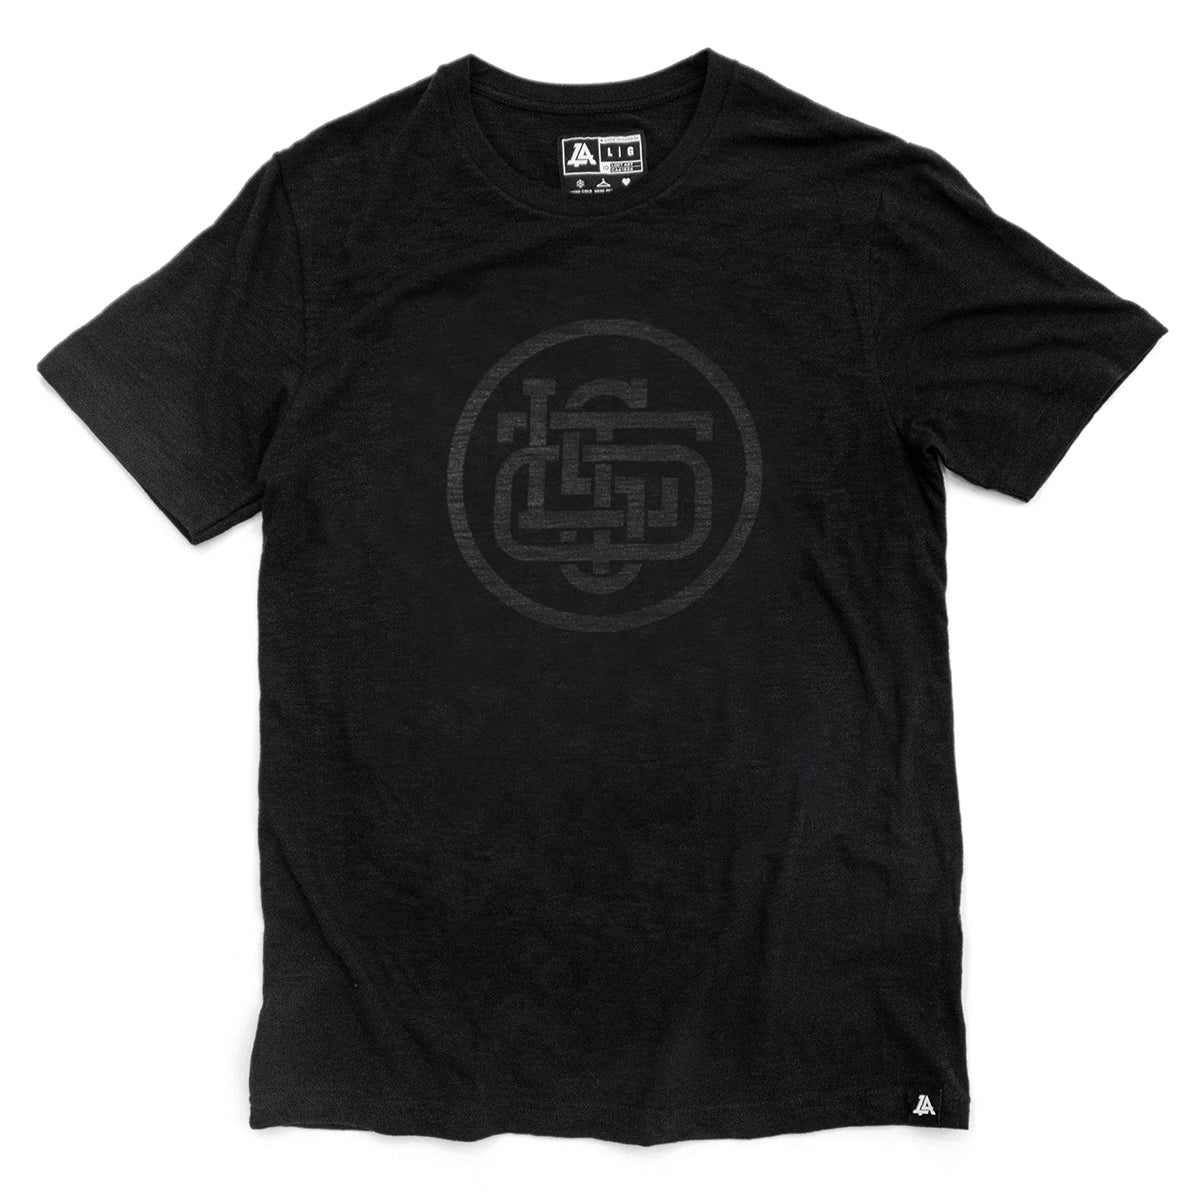 Lost Art Canada - black on black lost monogram tee front view